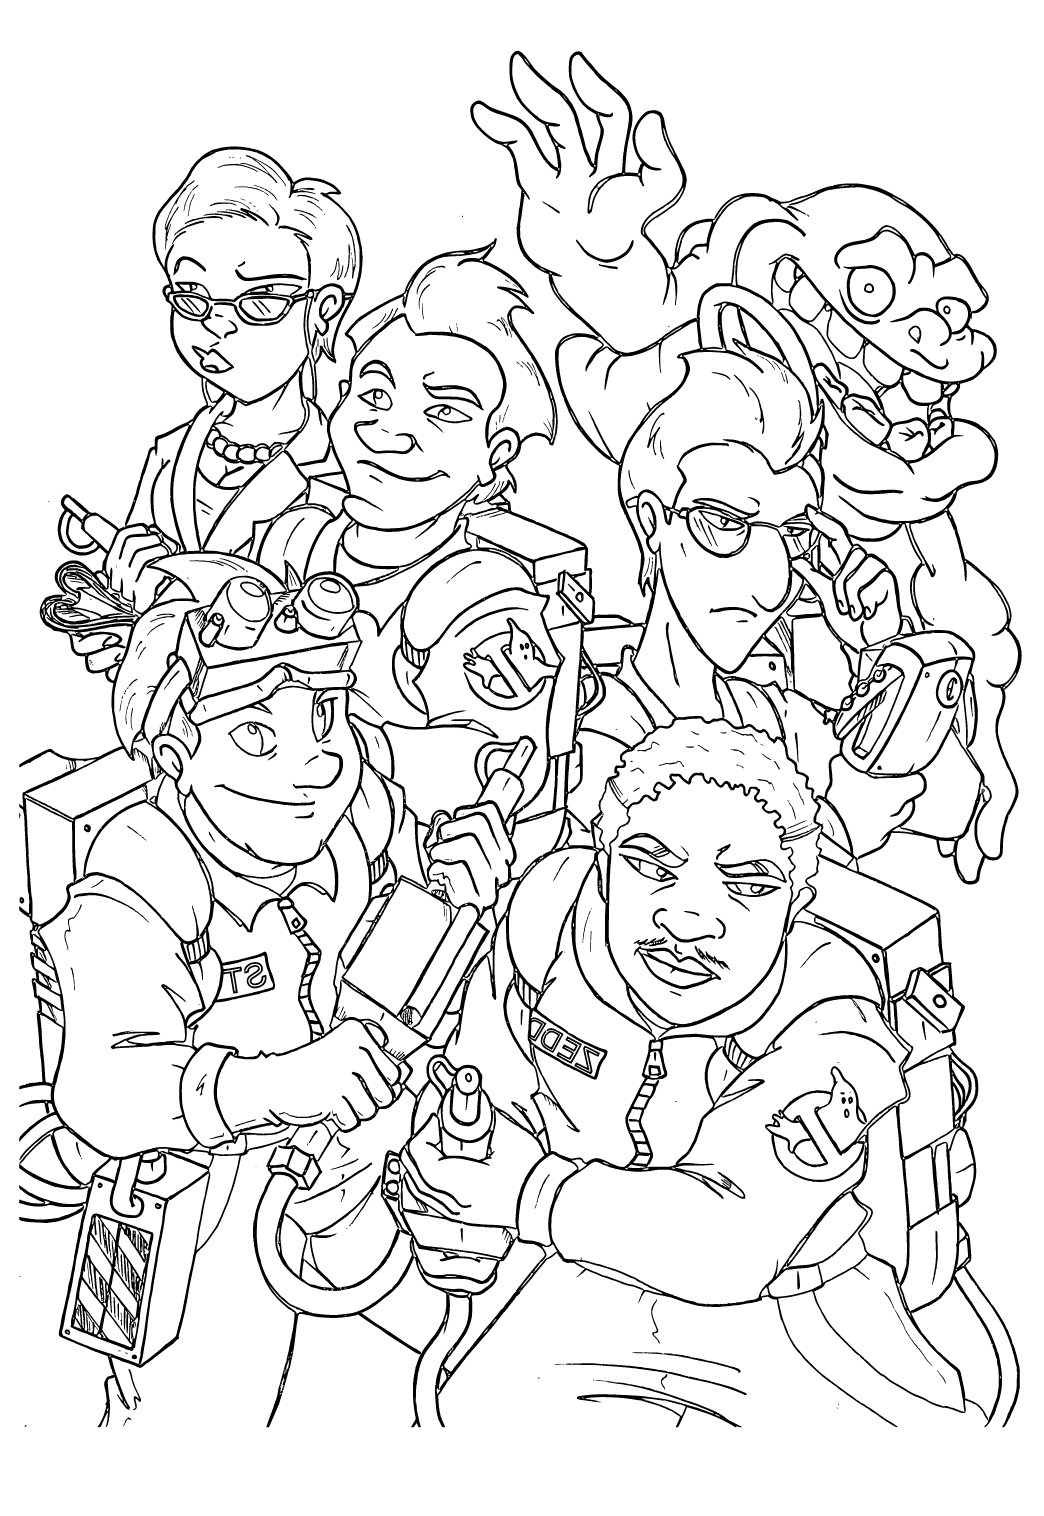 Free printable ghostbusters characters coloring page for adults and kids